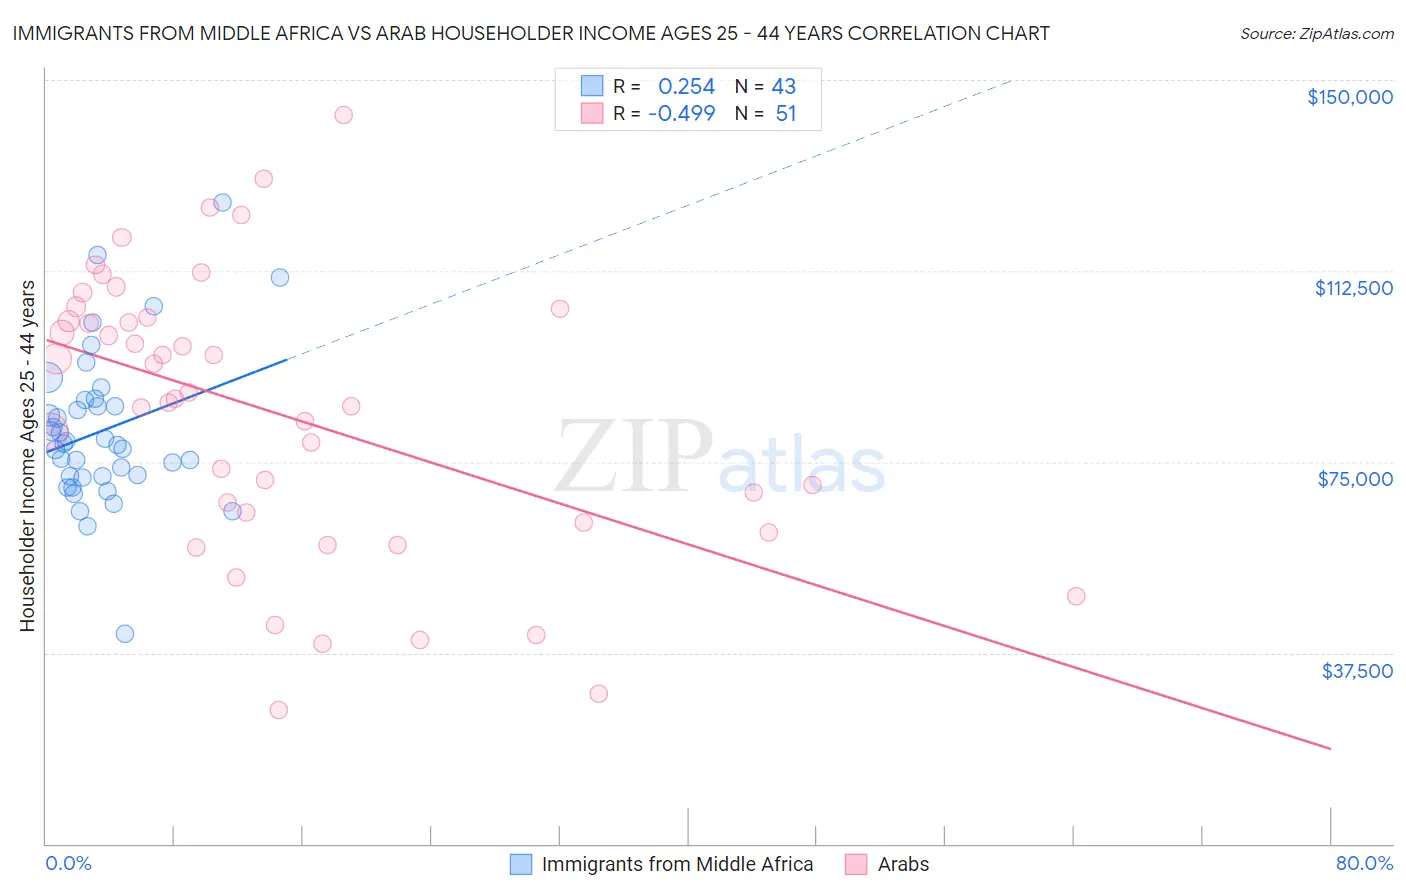 Immigrants from Middle Africa vs Arab Householder Income Ages 25 - 44 years